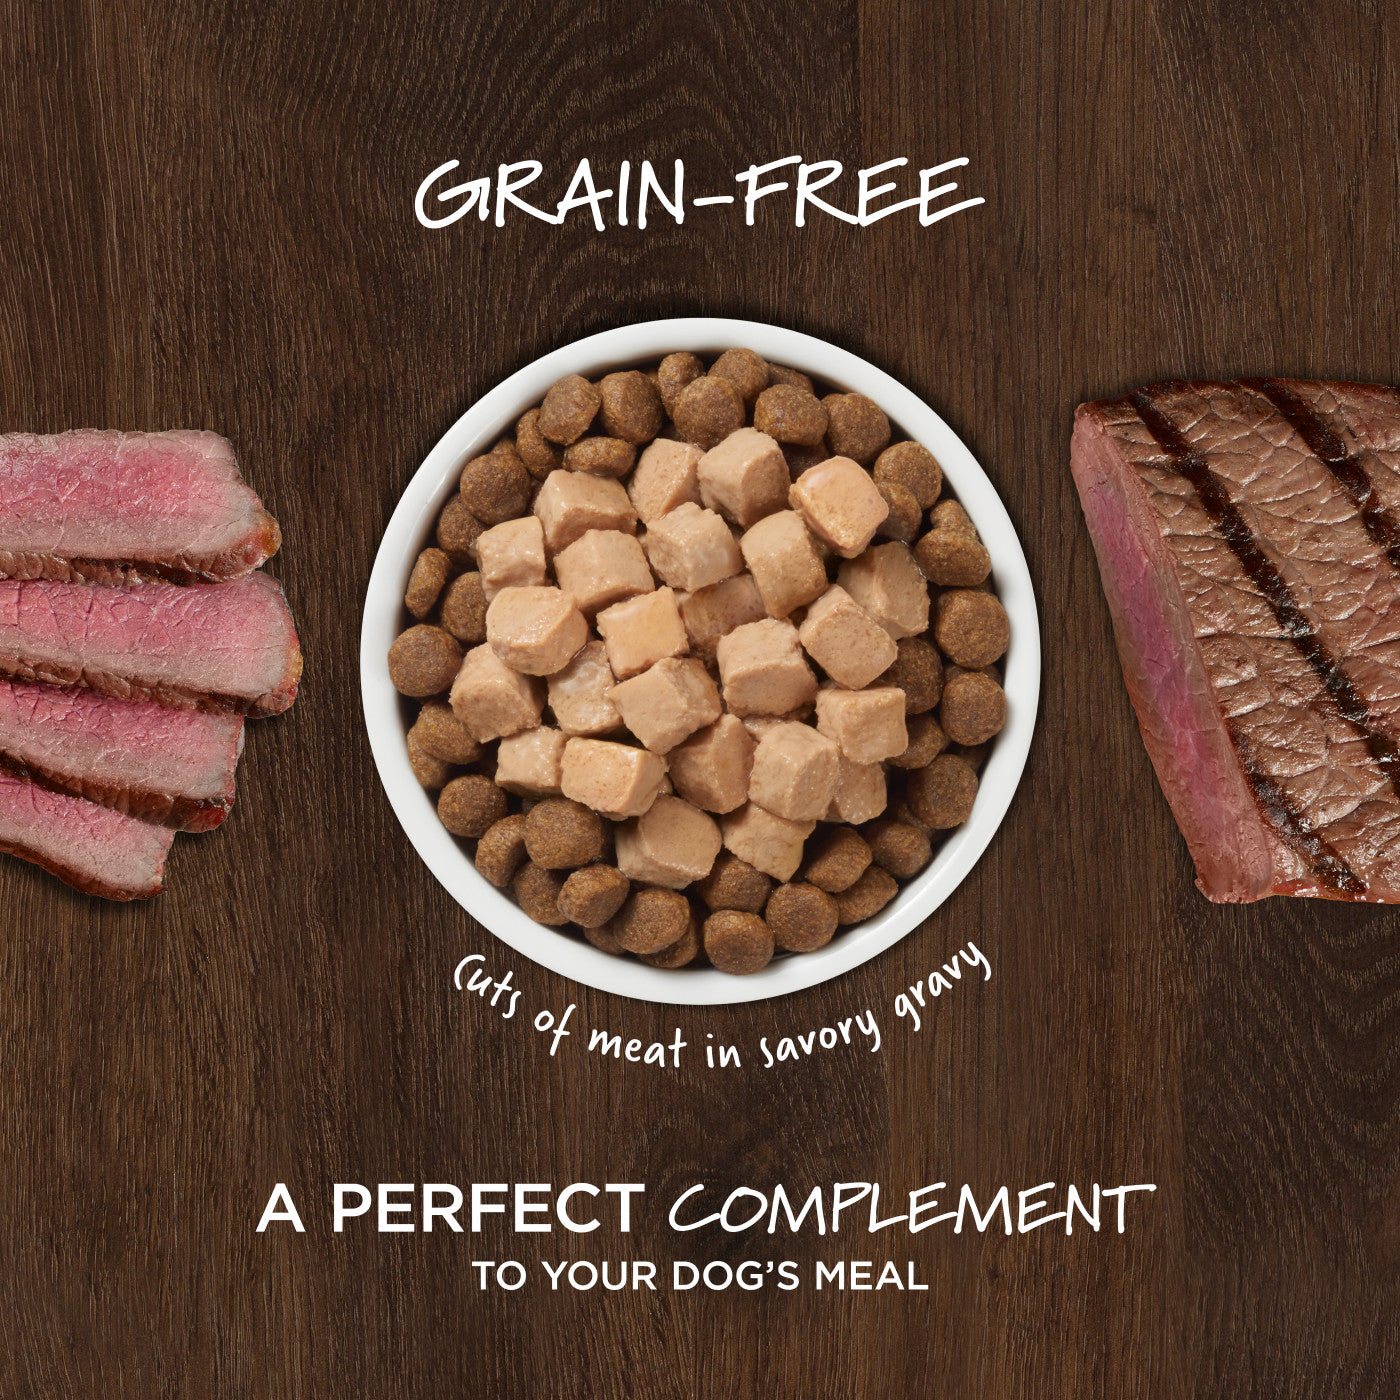 Instinct - Healthy Cravings Real Beef Recipe (For Dogs)